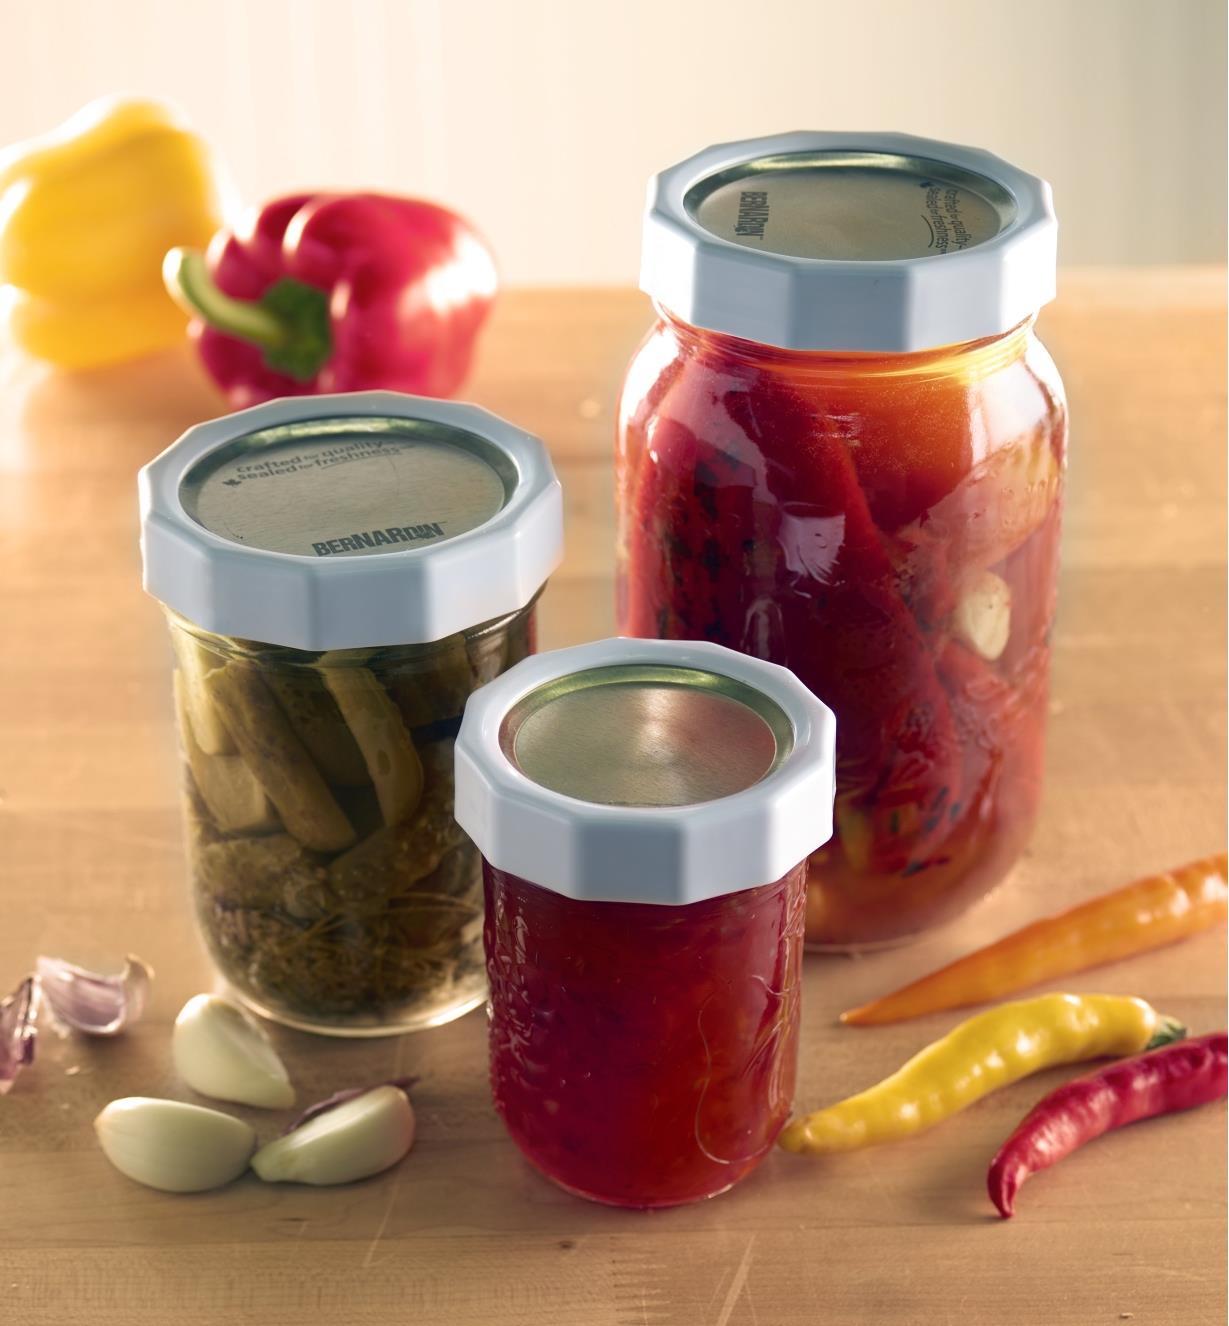 Tough bands on jars containing fermented foods